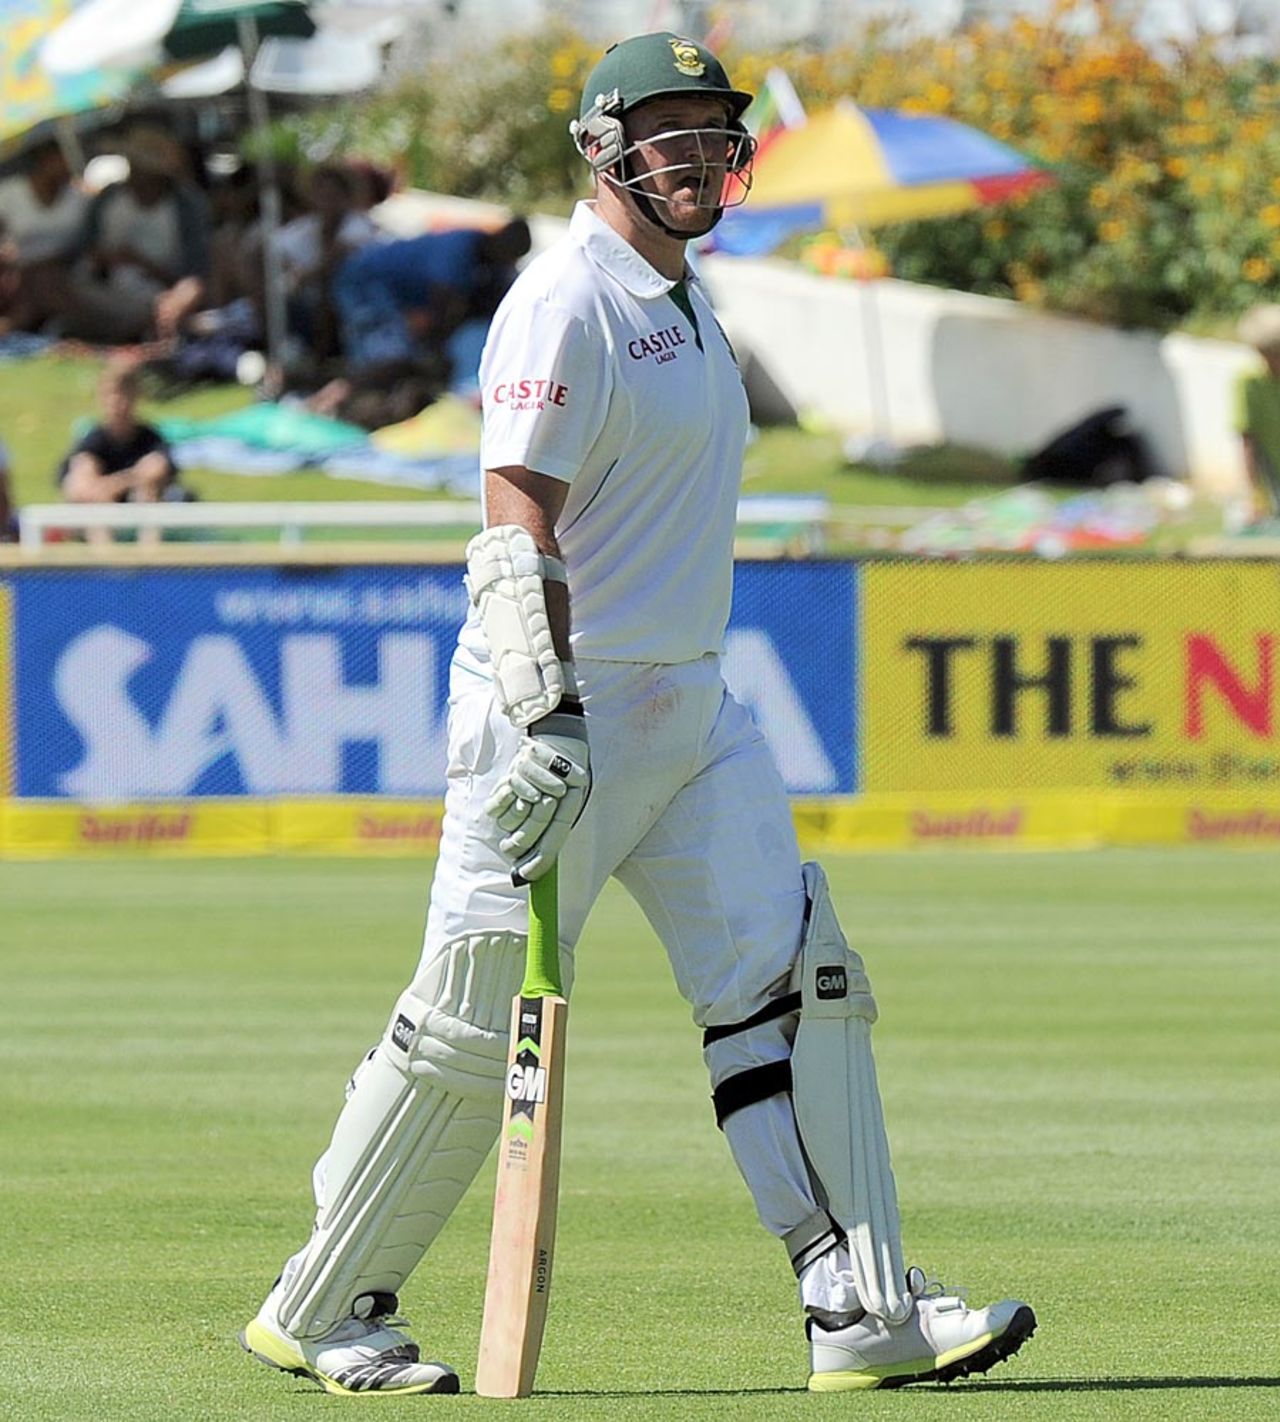 Graeme Smith walks back after being dismissed by Saeed Ajmal, South Africa v Pakistan, 2nd Test, Cape Town, 4th day, February 17, 2013